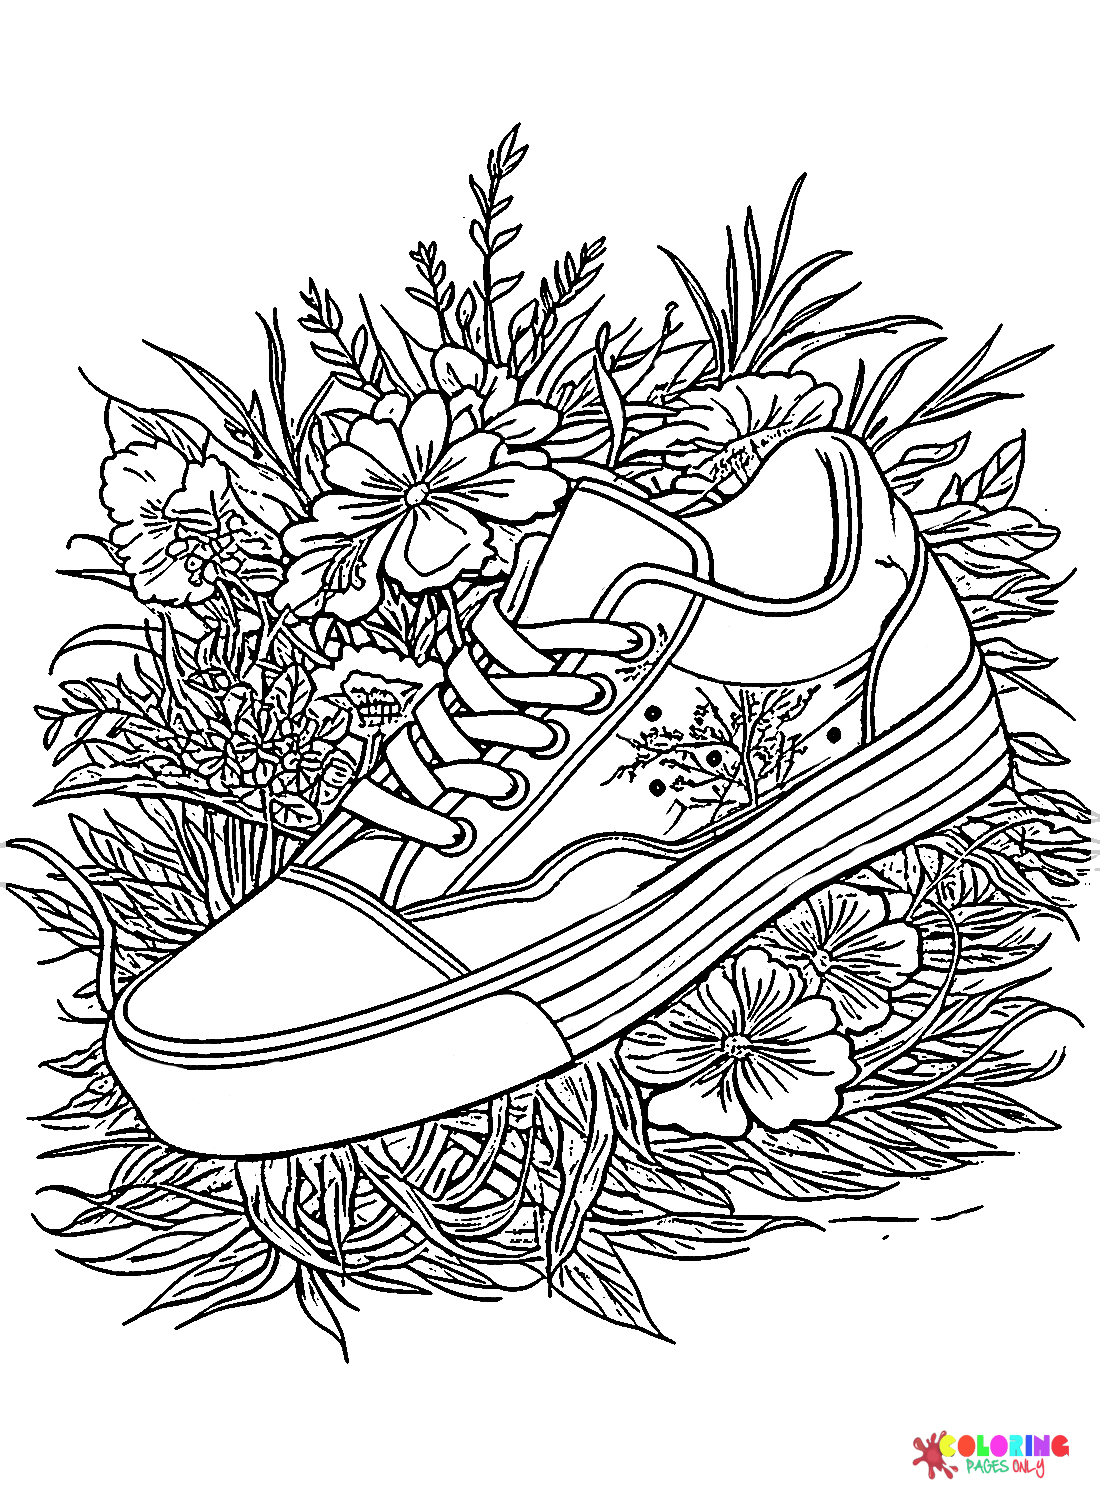 Sneaker with Flowers from Sneaker